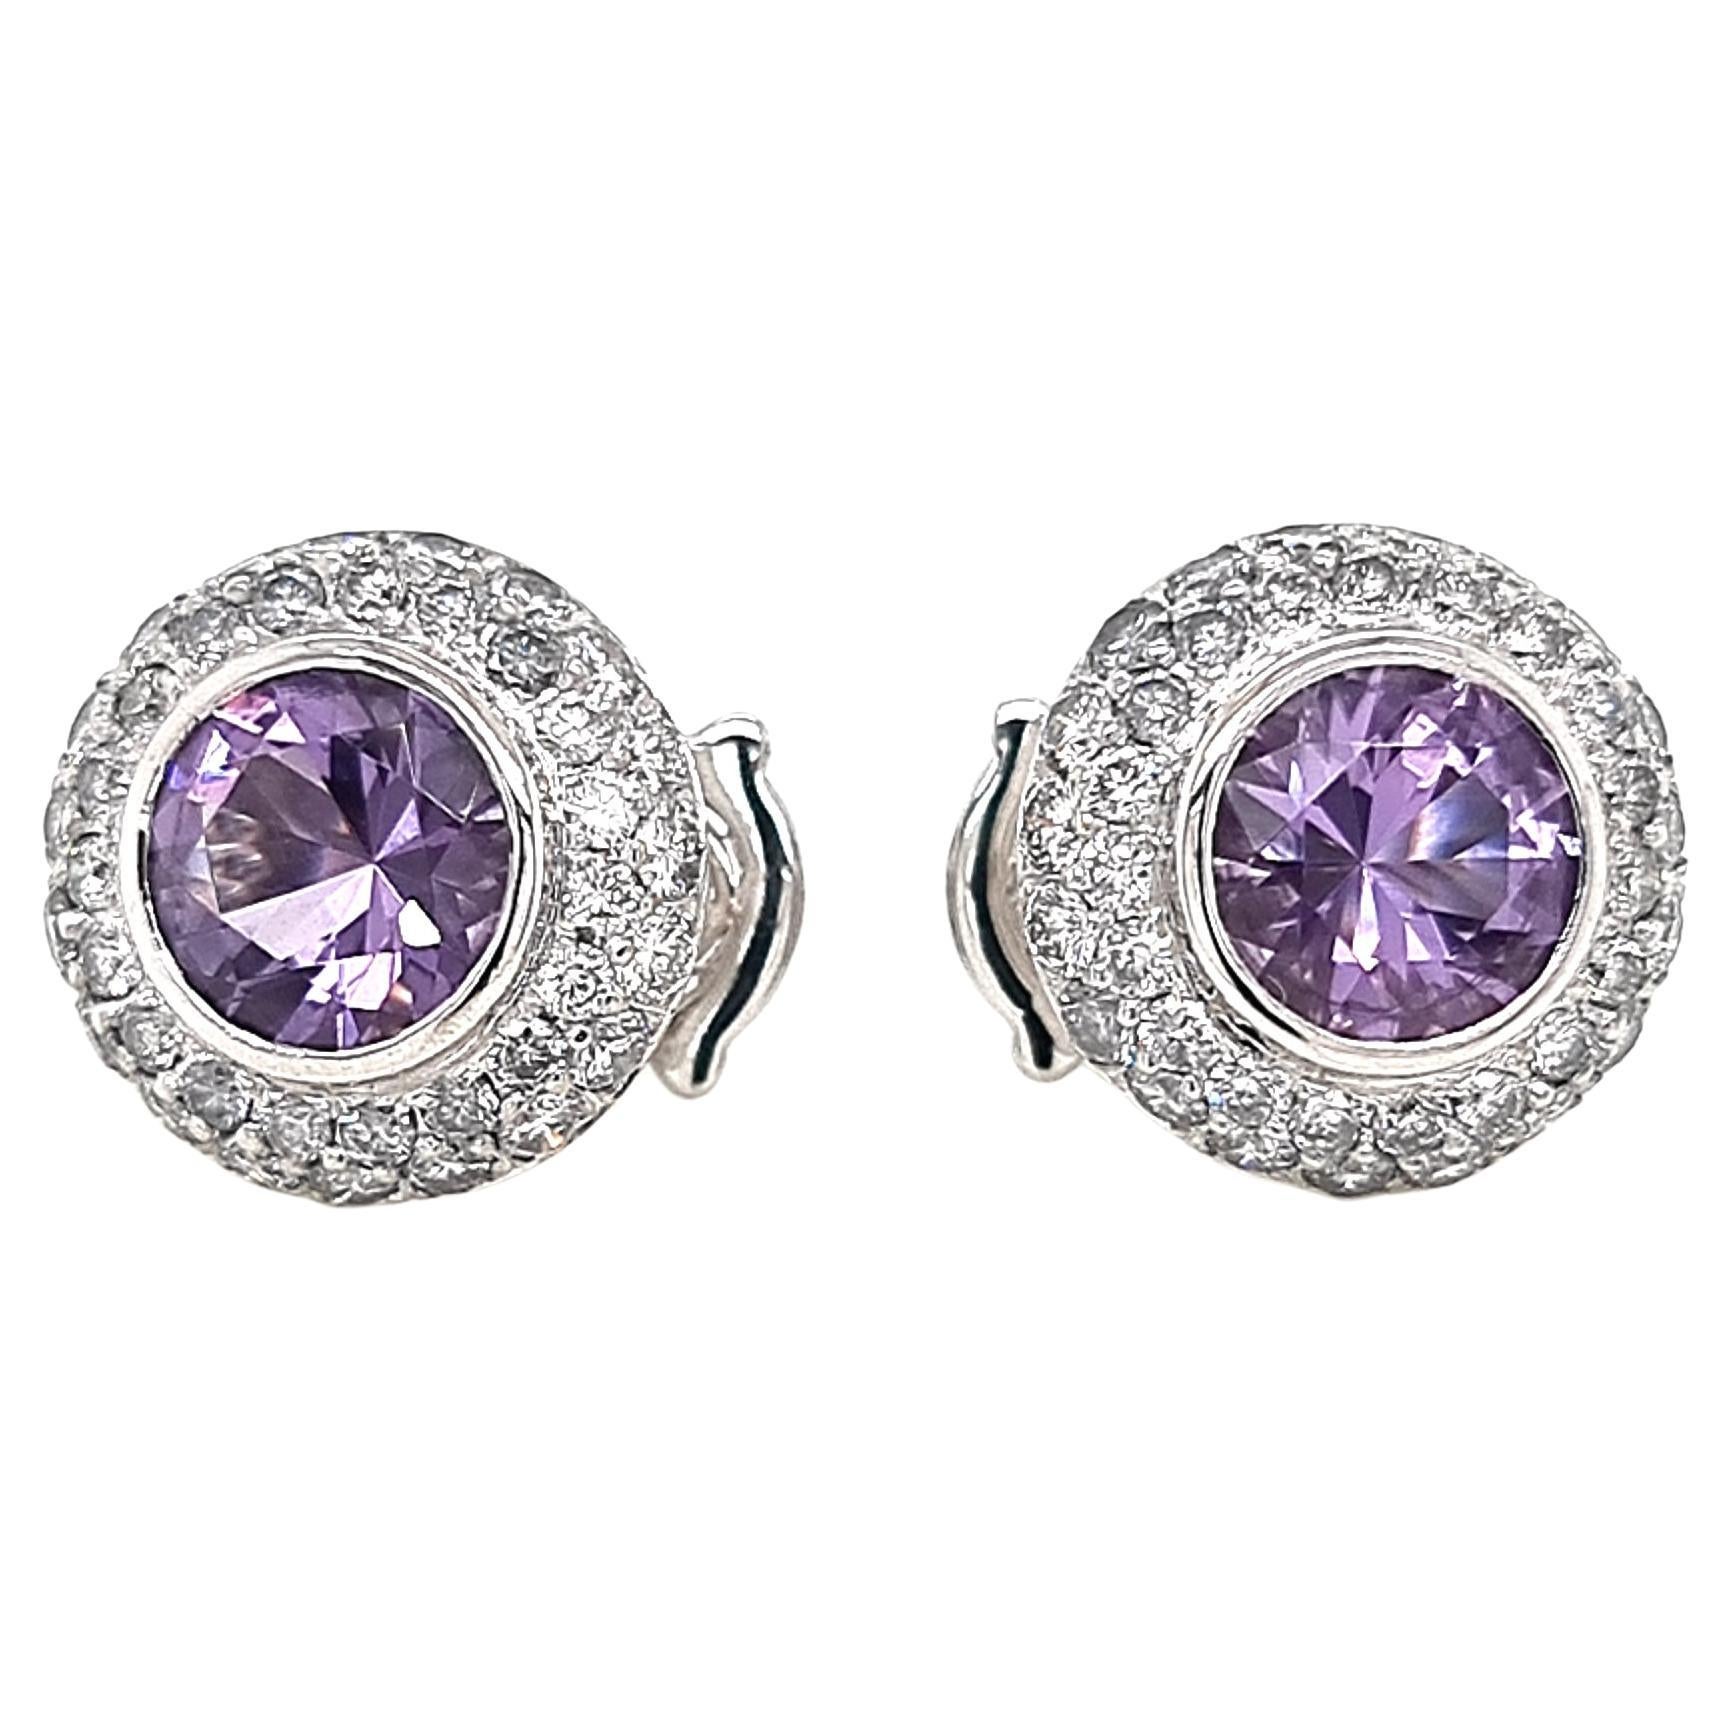 Round Amethyst and White Diamonds Set in 18K White Gold Earrings For Sale